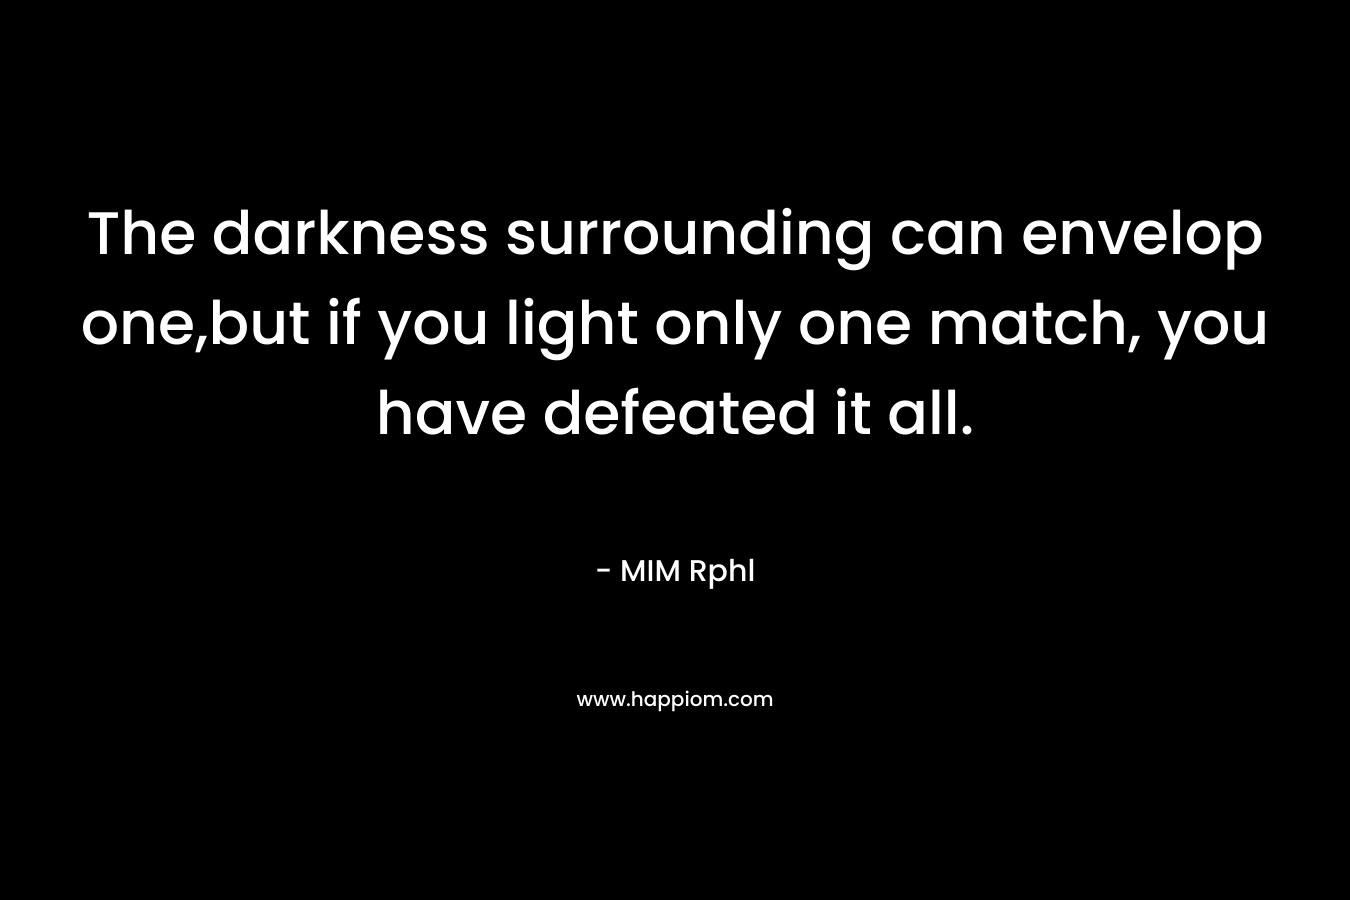 The darkness surrounding can envelop one,but if you light only one match, you have defeated it all. – MIM Rphl